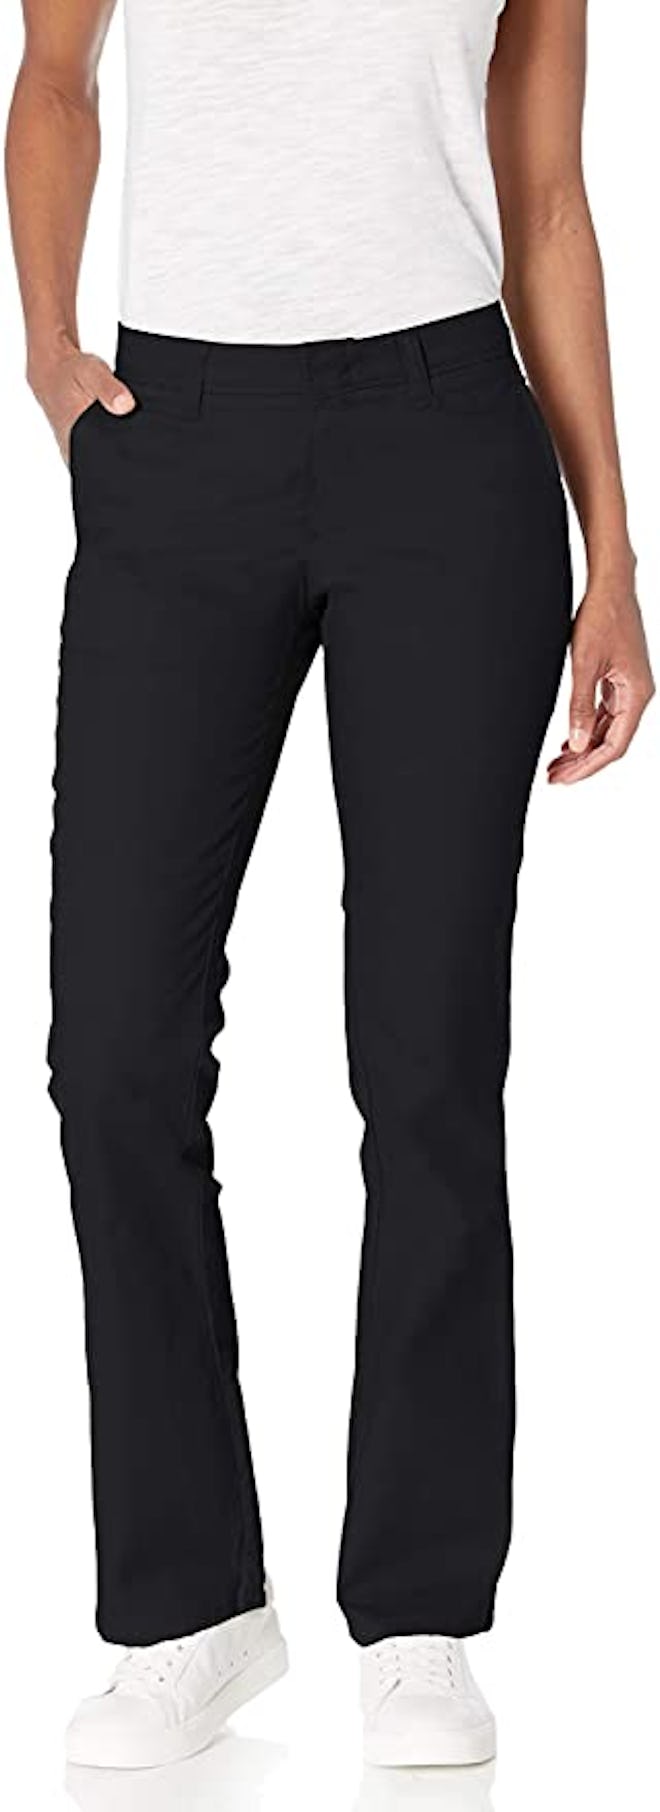 Dickies Flat Front Stretch Twill Pant Slim Fit Bootcut